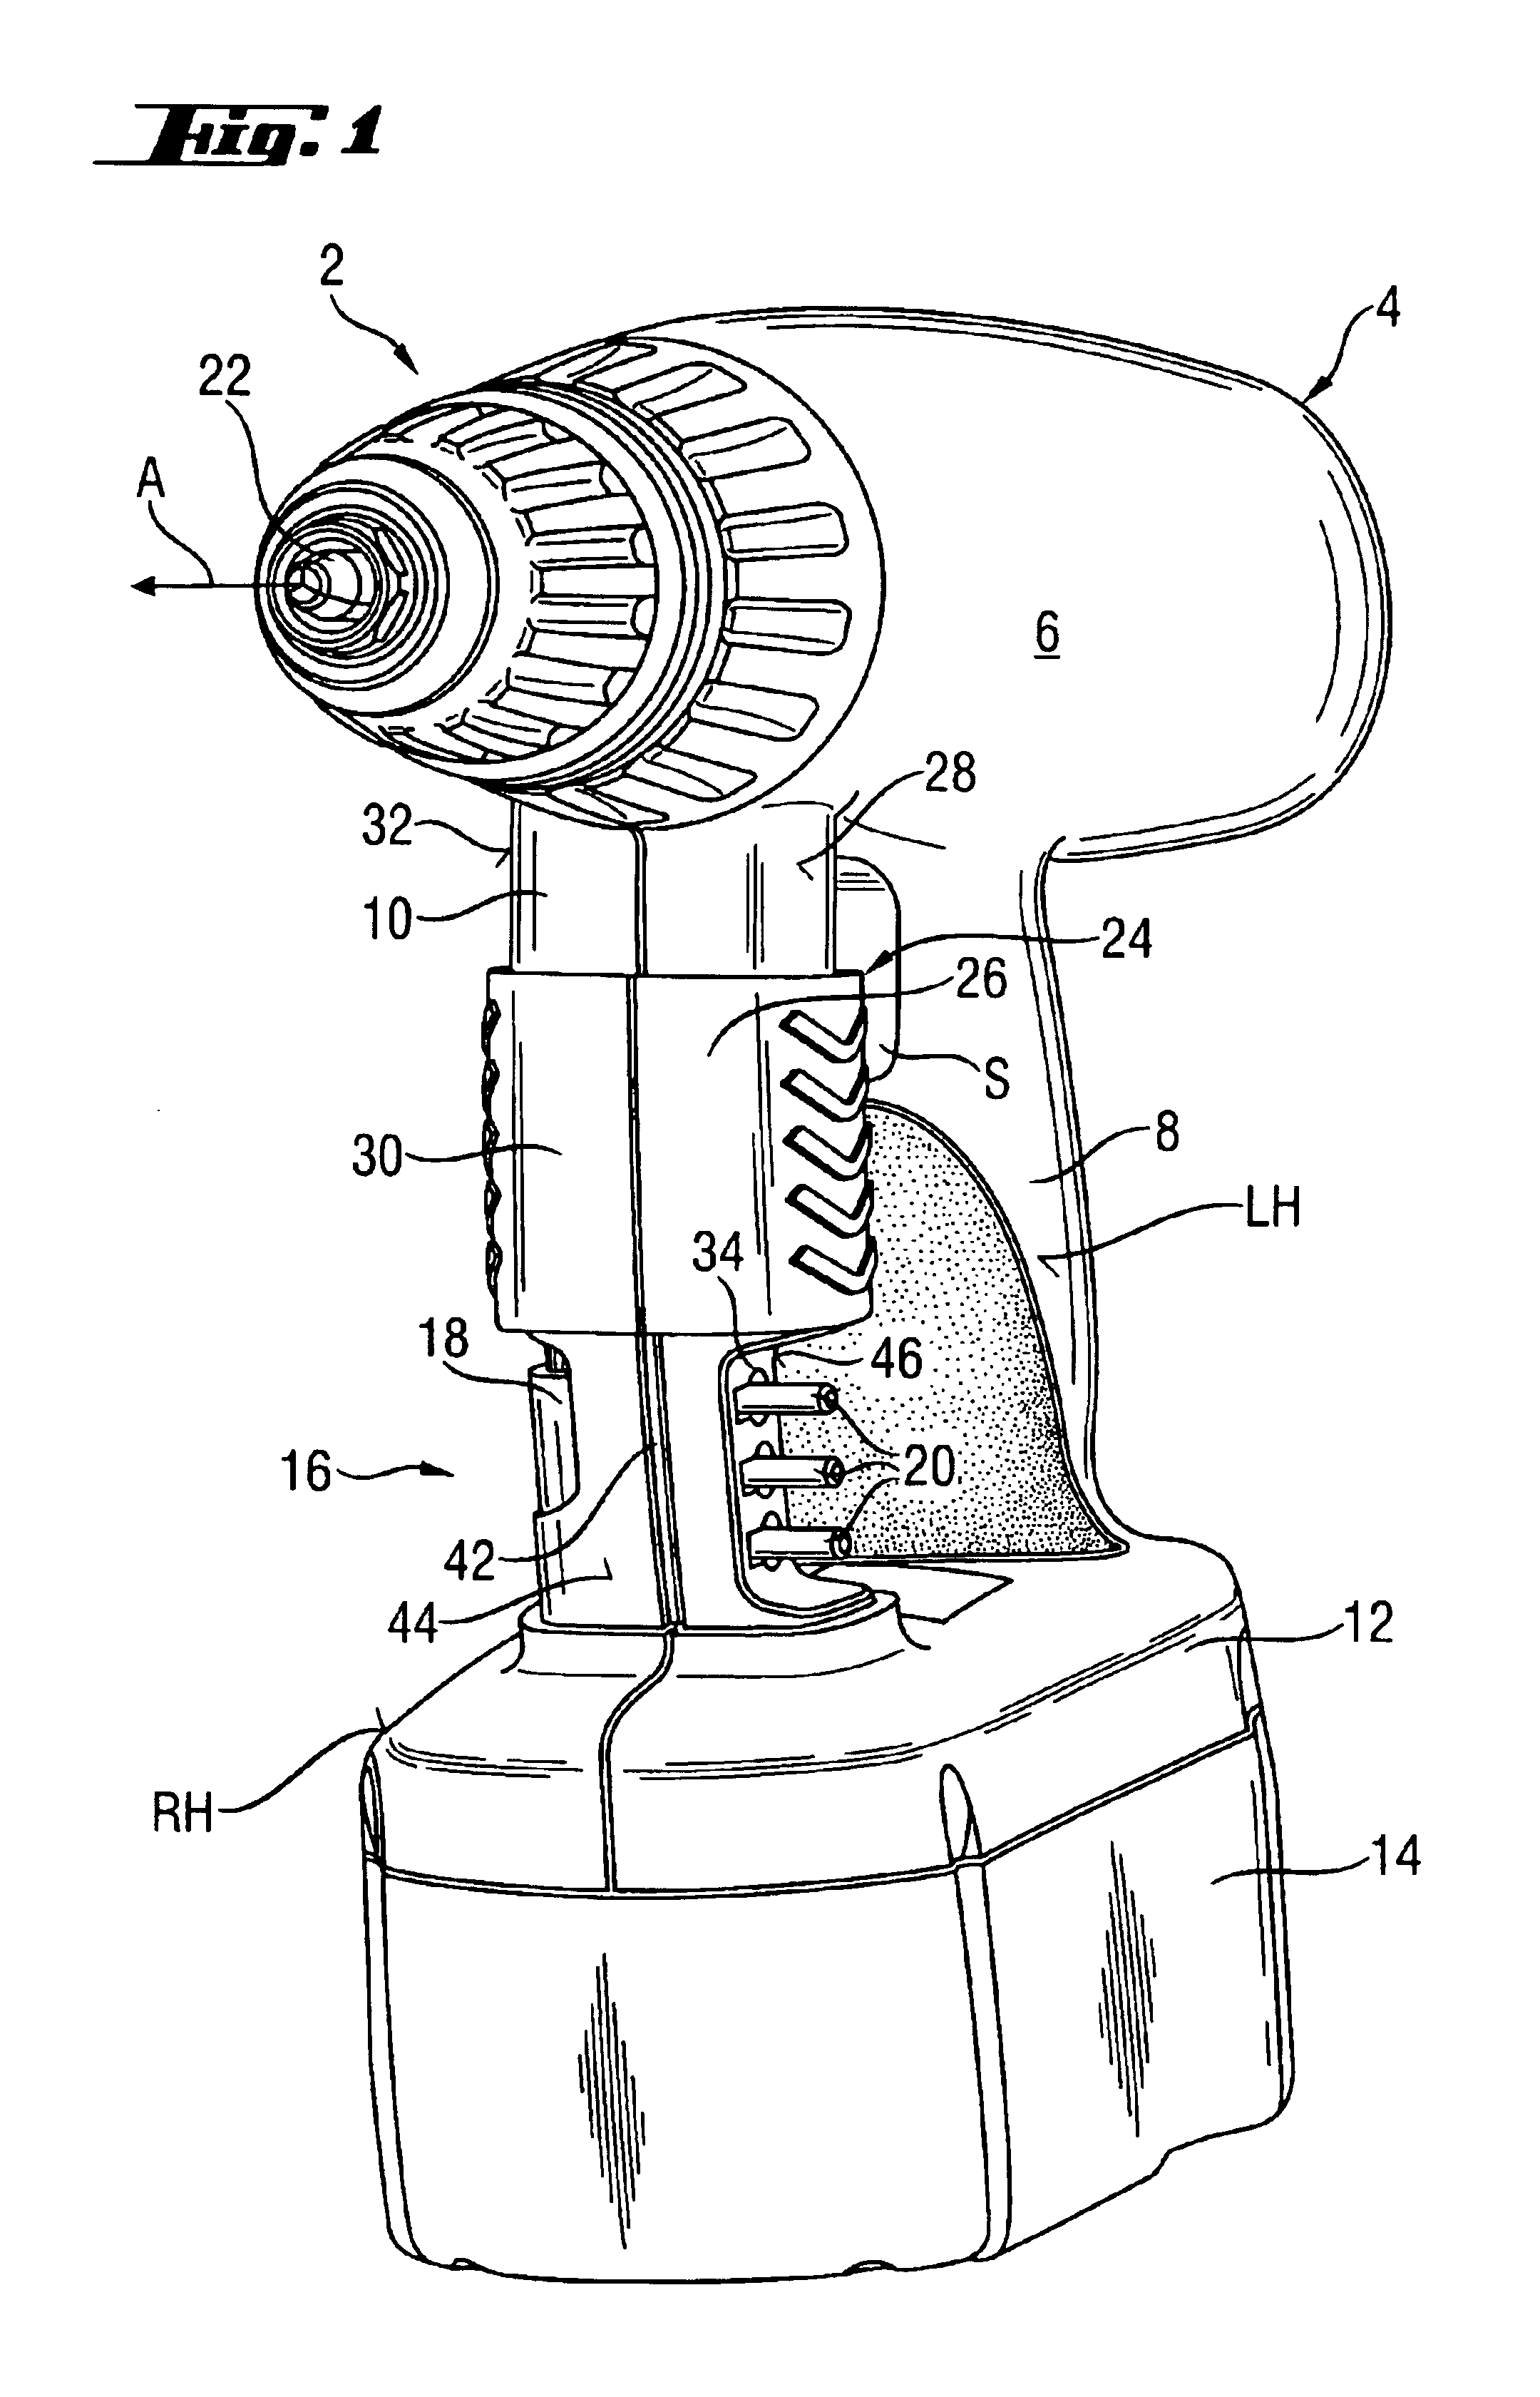 Hand tool with tool bit storage receptacle